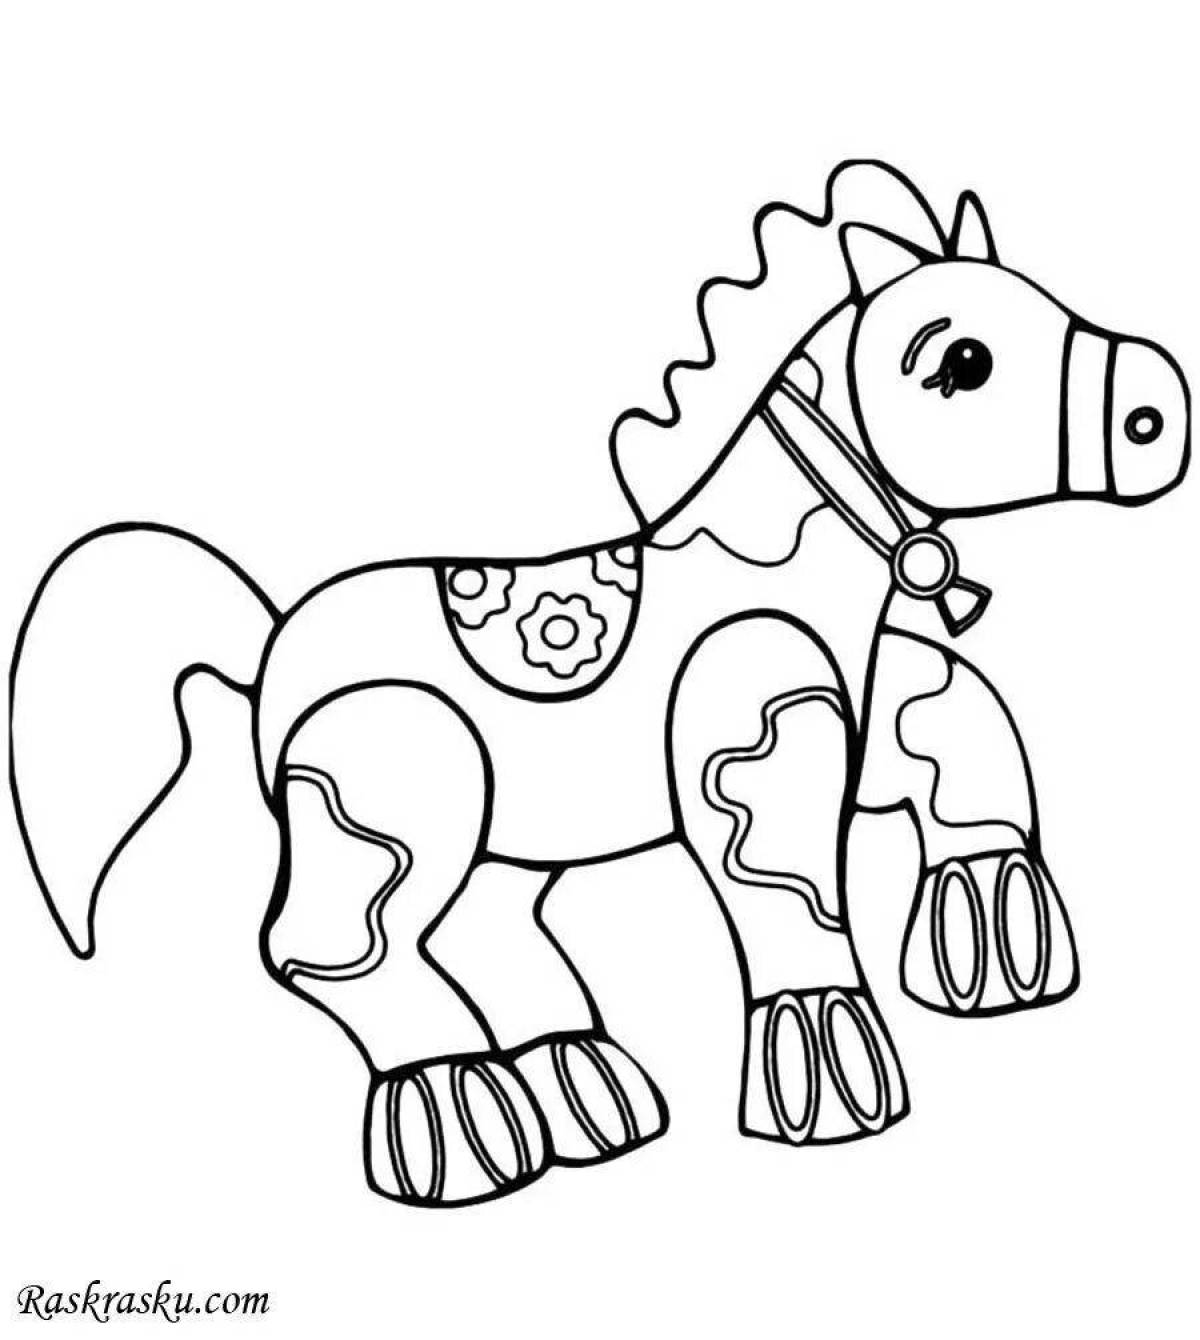 Fun horse coloring book for 4-5 year olds